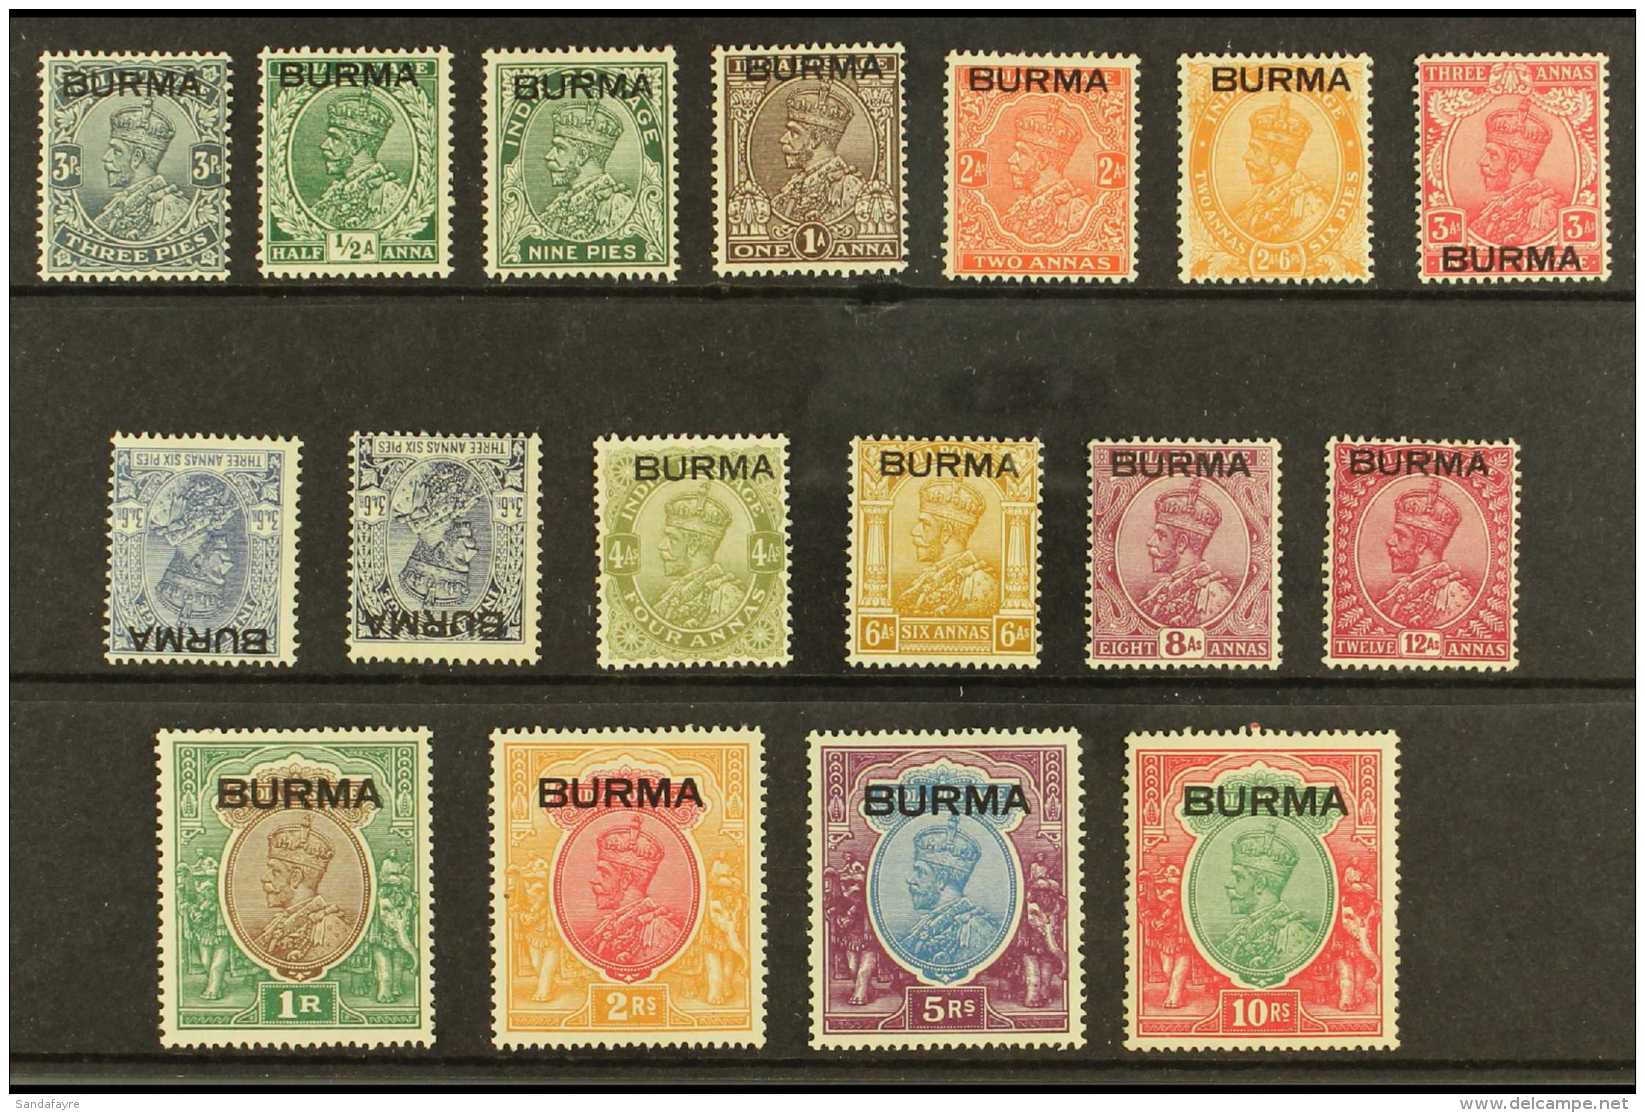 1937 KGV India Stamps Overprinted "BURMA," Complete To 10r, Incl. Additional 3a6p Shade, SG 1/16, Very Fine Mint... - Birmania (...-1947)